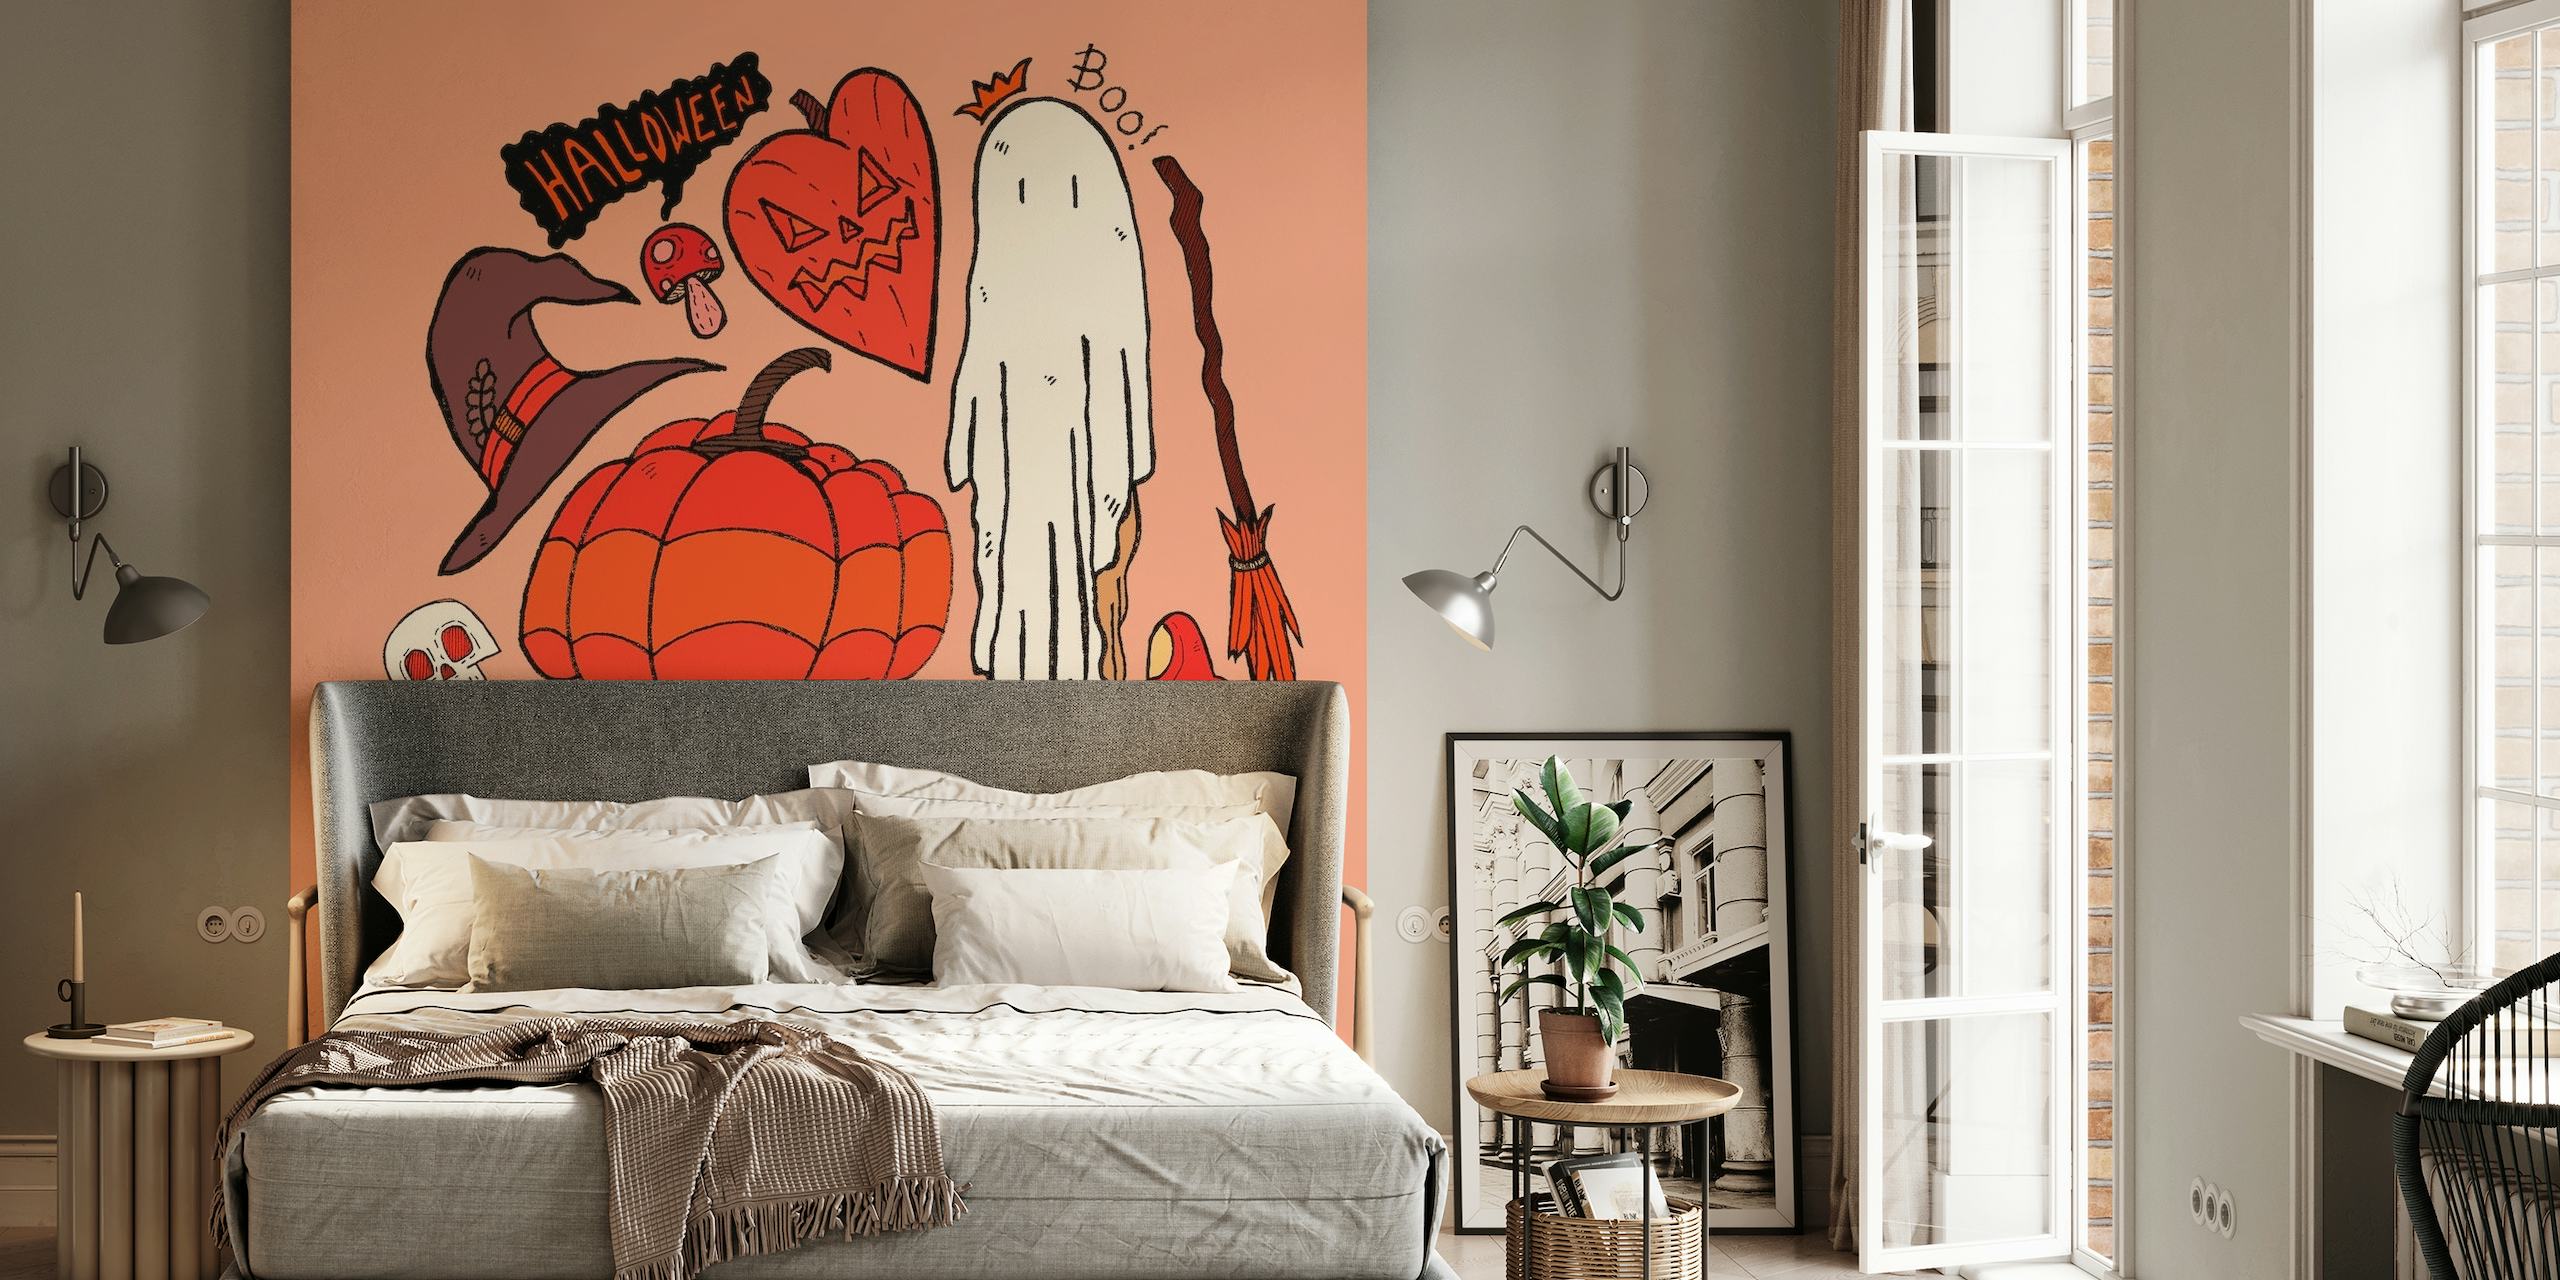 Halloween-themed wall mural with pumpkins, ghosts, and mystical elements